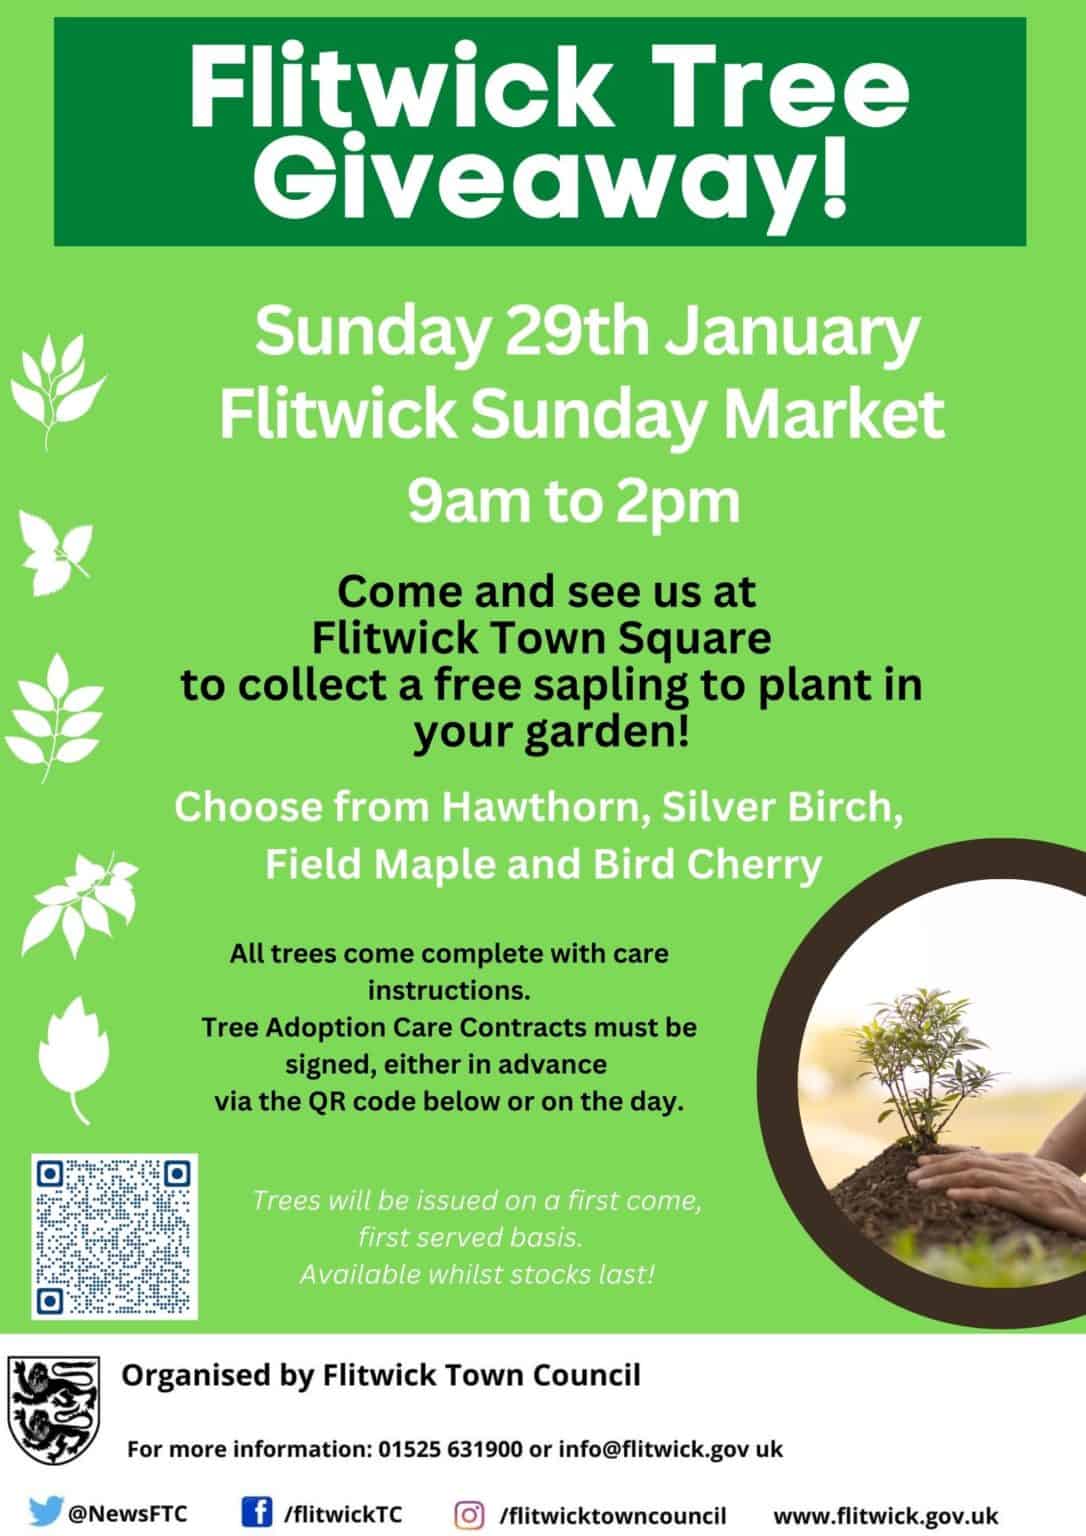 Flitwick Tree Giveaway! - Flitwick Town Council